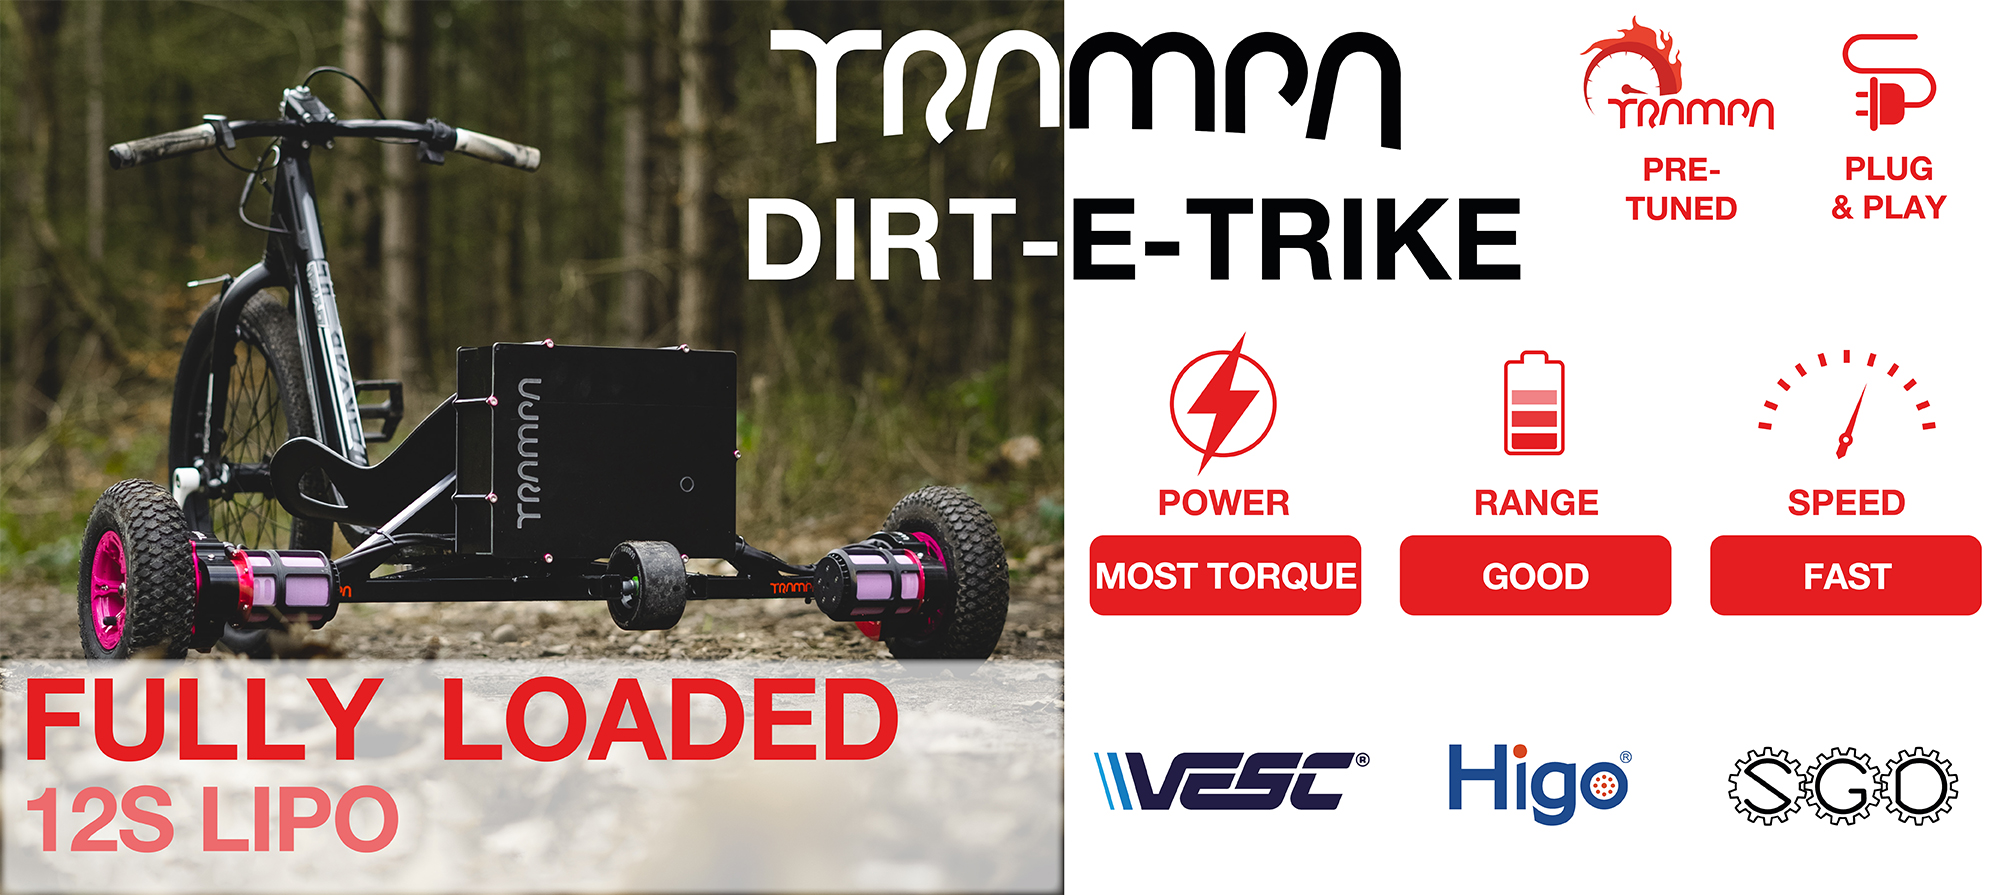 Electric Trike aka the Dirt-E-Trike is assembled from the amazing TRAMPA Electric Mountainboard parts to so much unreal fun!!